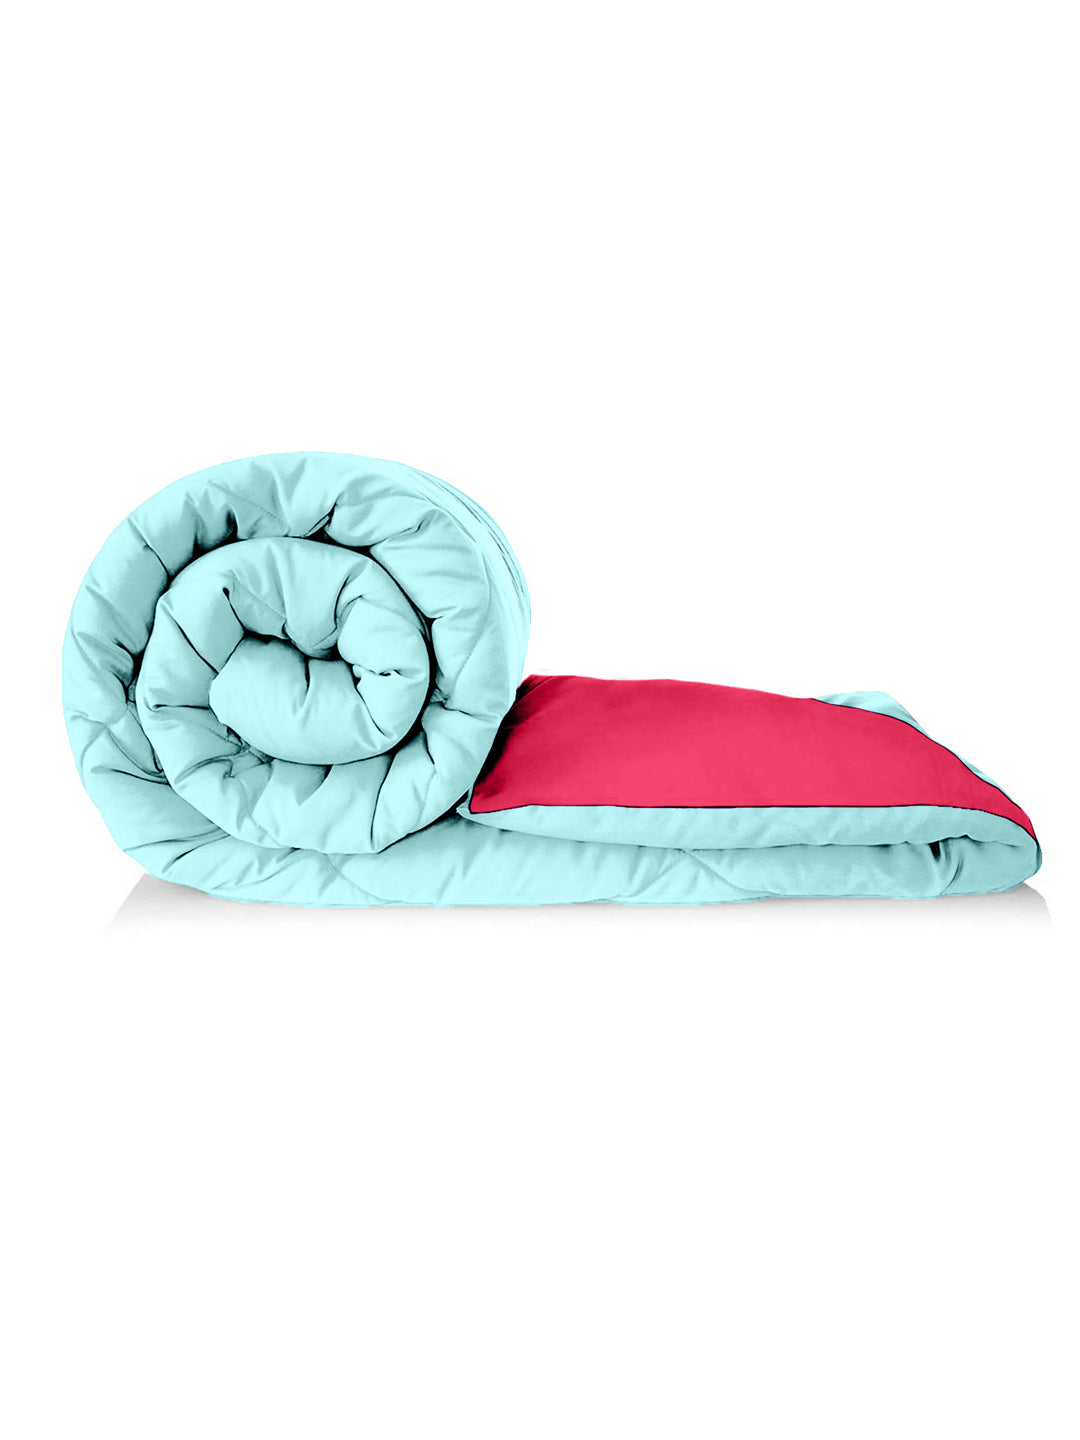 Reversible Single Bed Comforter 200 GSM 60x90 Inches (Aqua Blue & Pink)